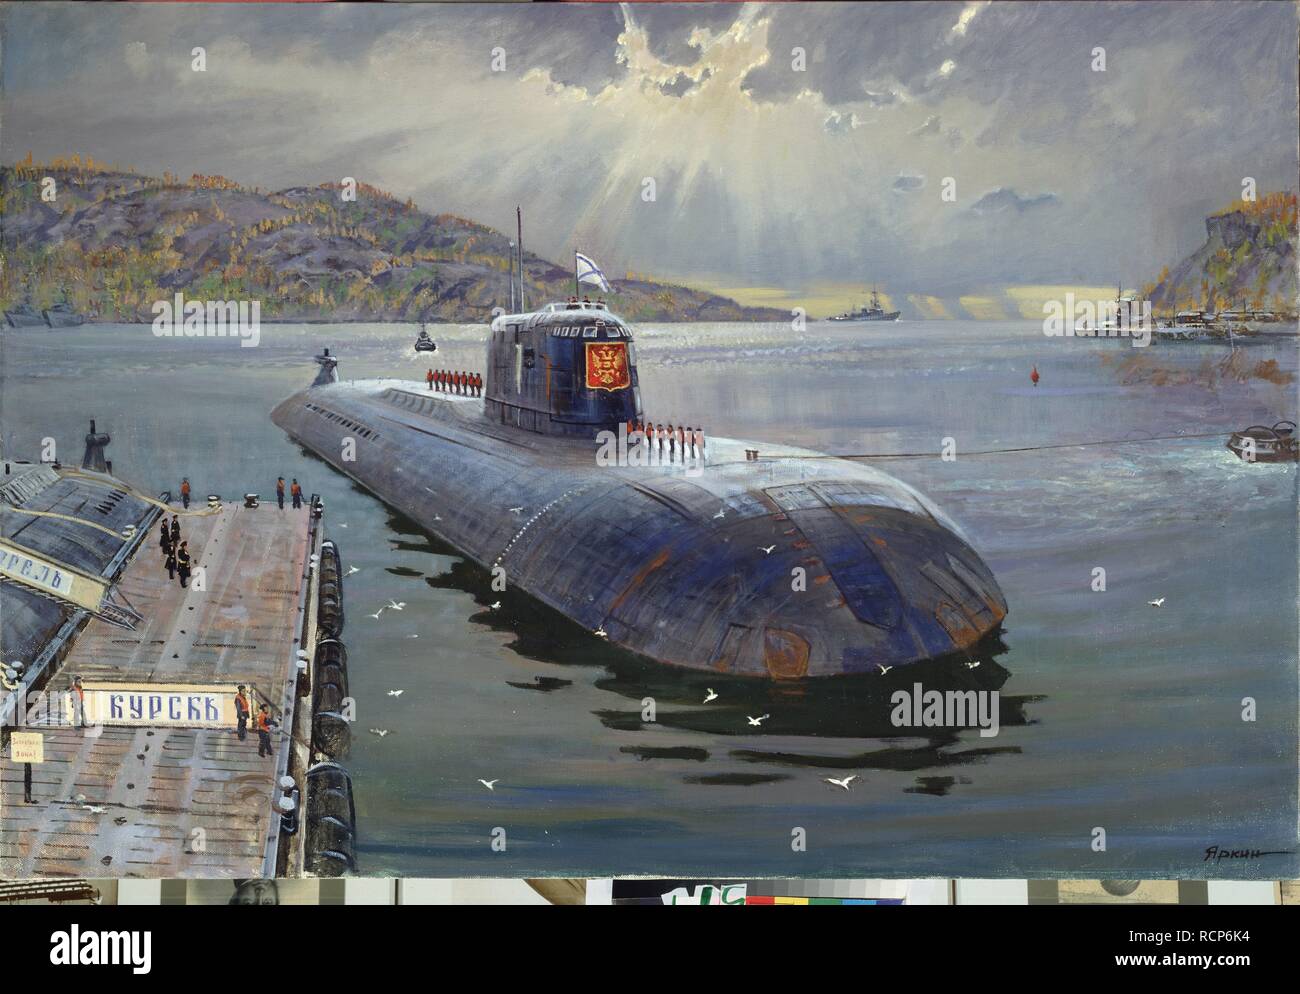 The last Seafaring of the Russian nuclear submarine Kursk. Museum: State Central Navy Museum, St. Petersburg. Author: Yarkin, Vladimir Petrovich. Stock Photo